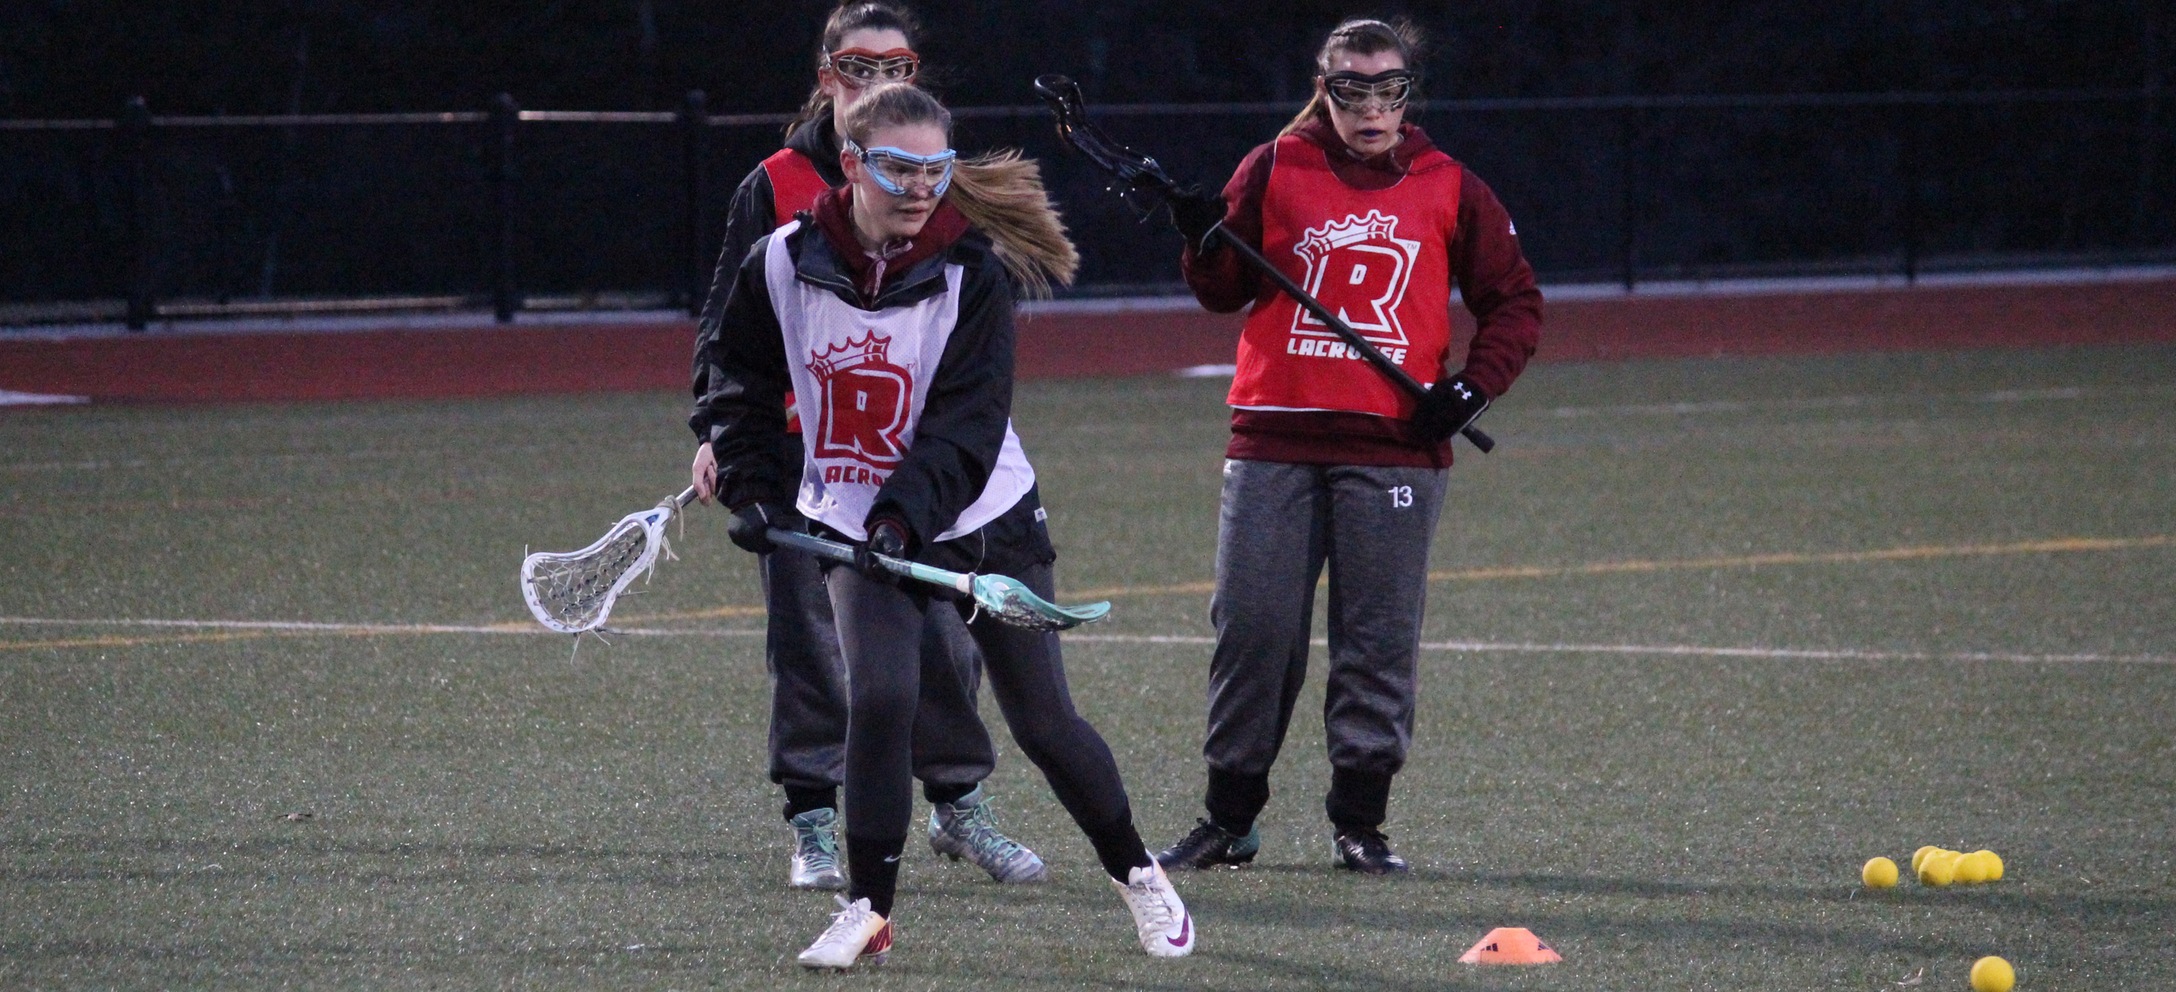 VIDEO: Women's Lacrosse Braves Cold for First Practice of 2018